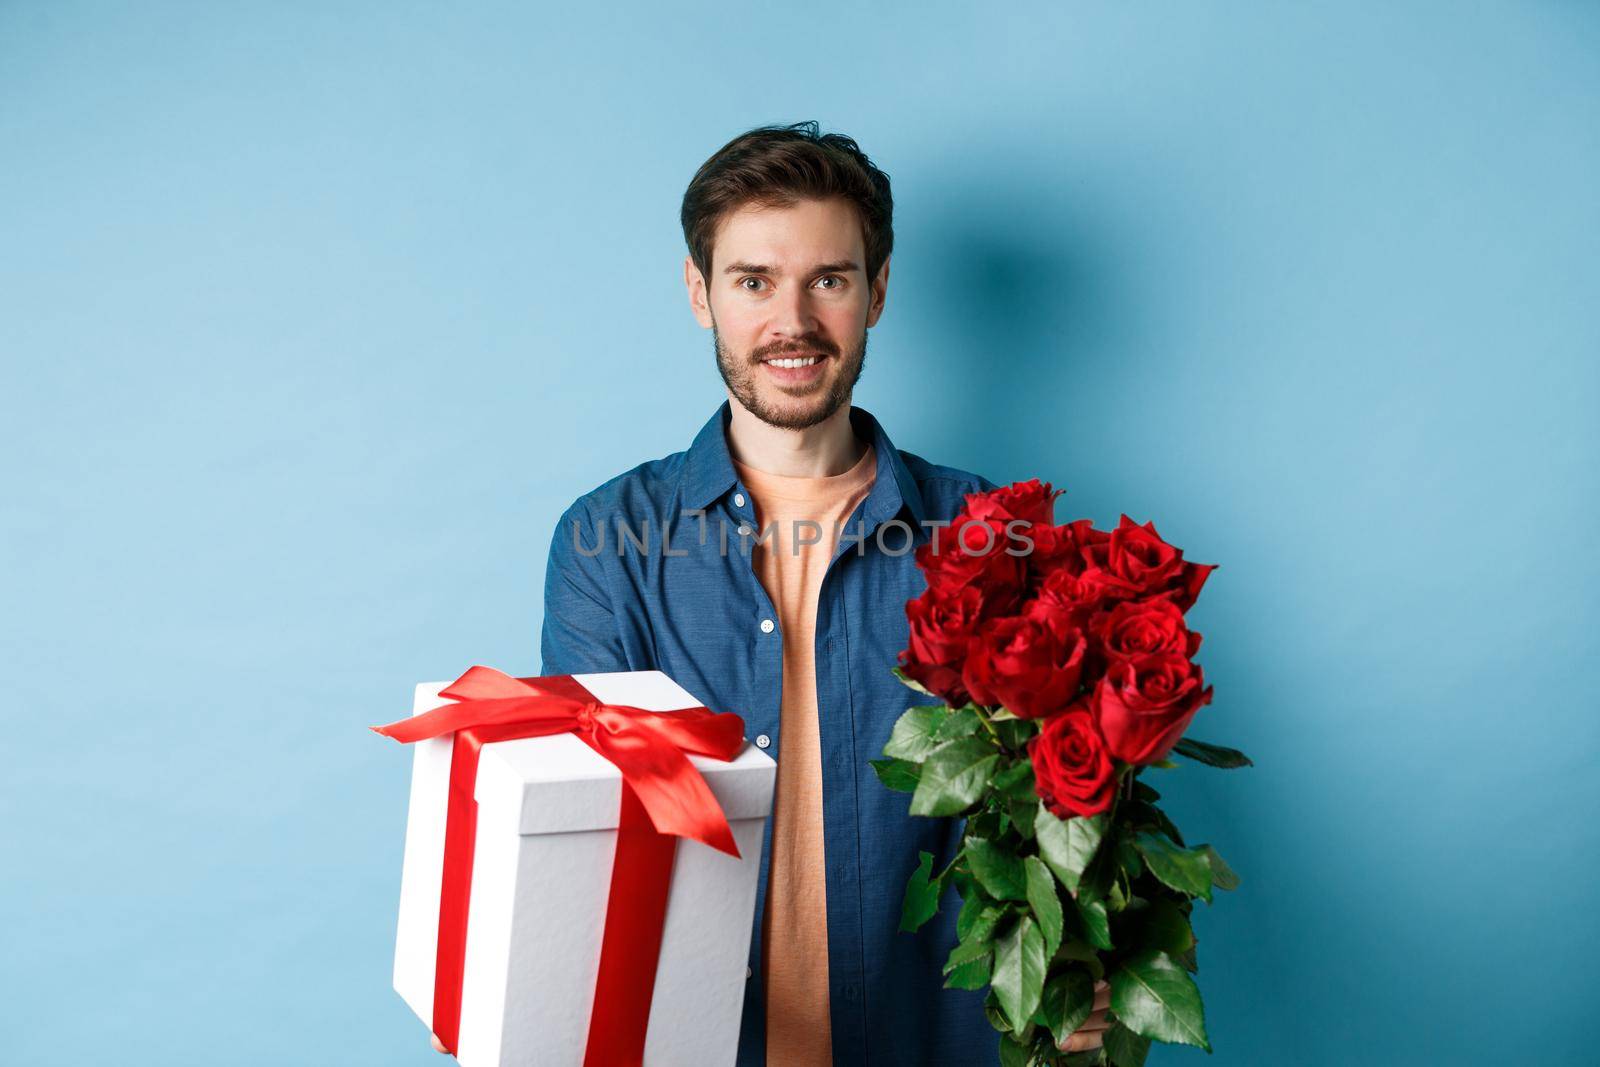 Love and Valentines day concept. Charming young man giving gift and bouquet of roses to girlfriend, standing over blue background.